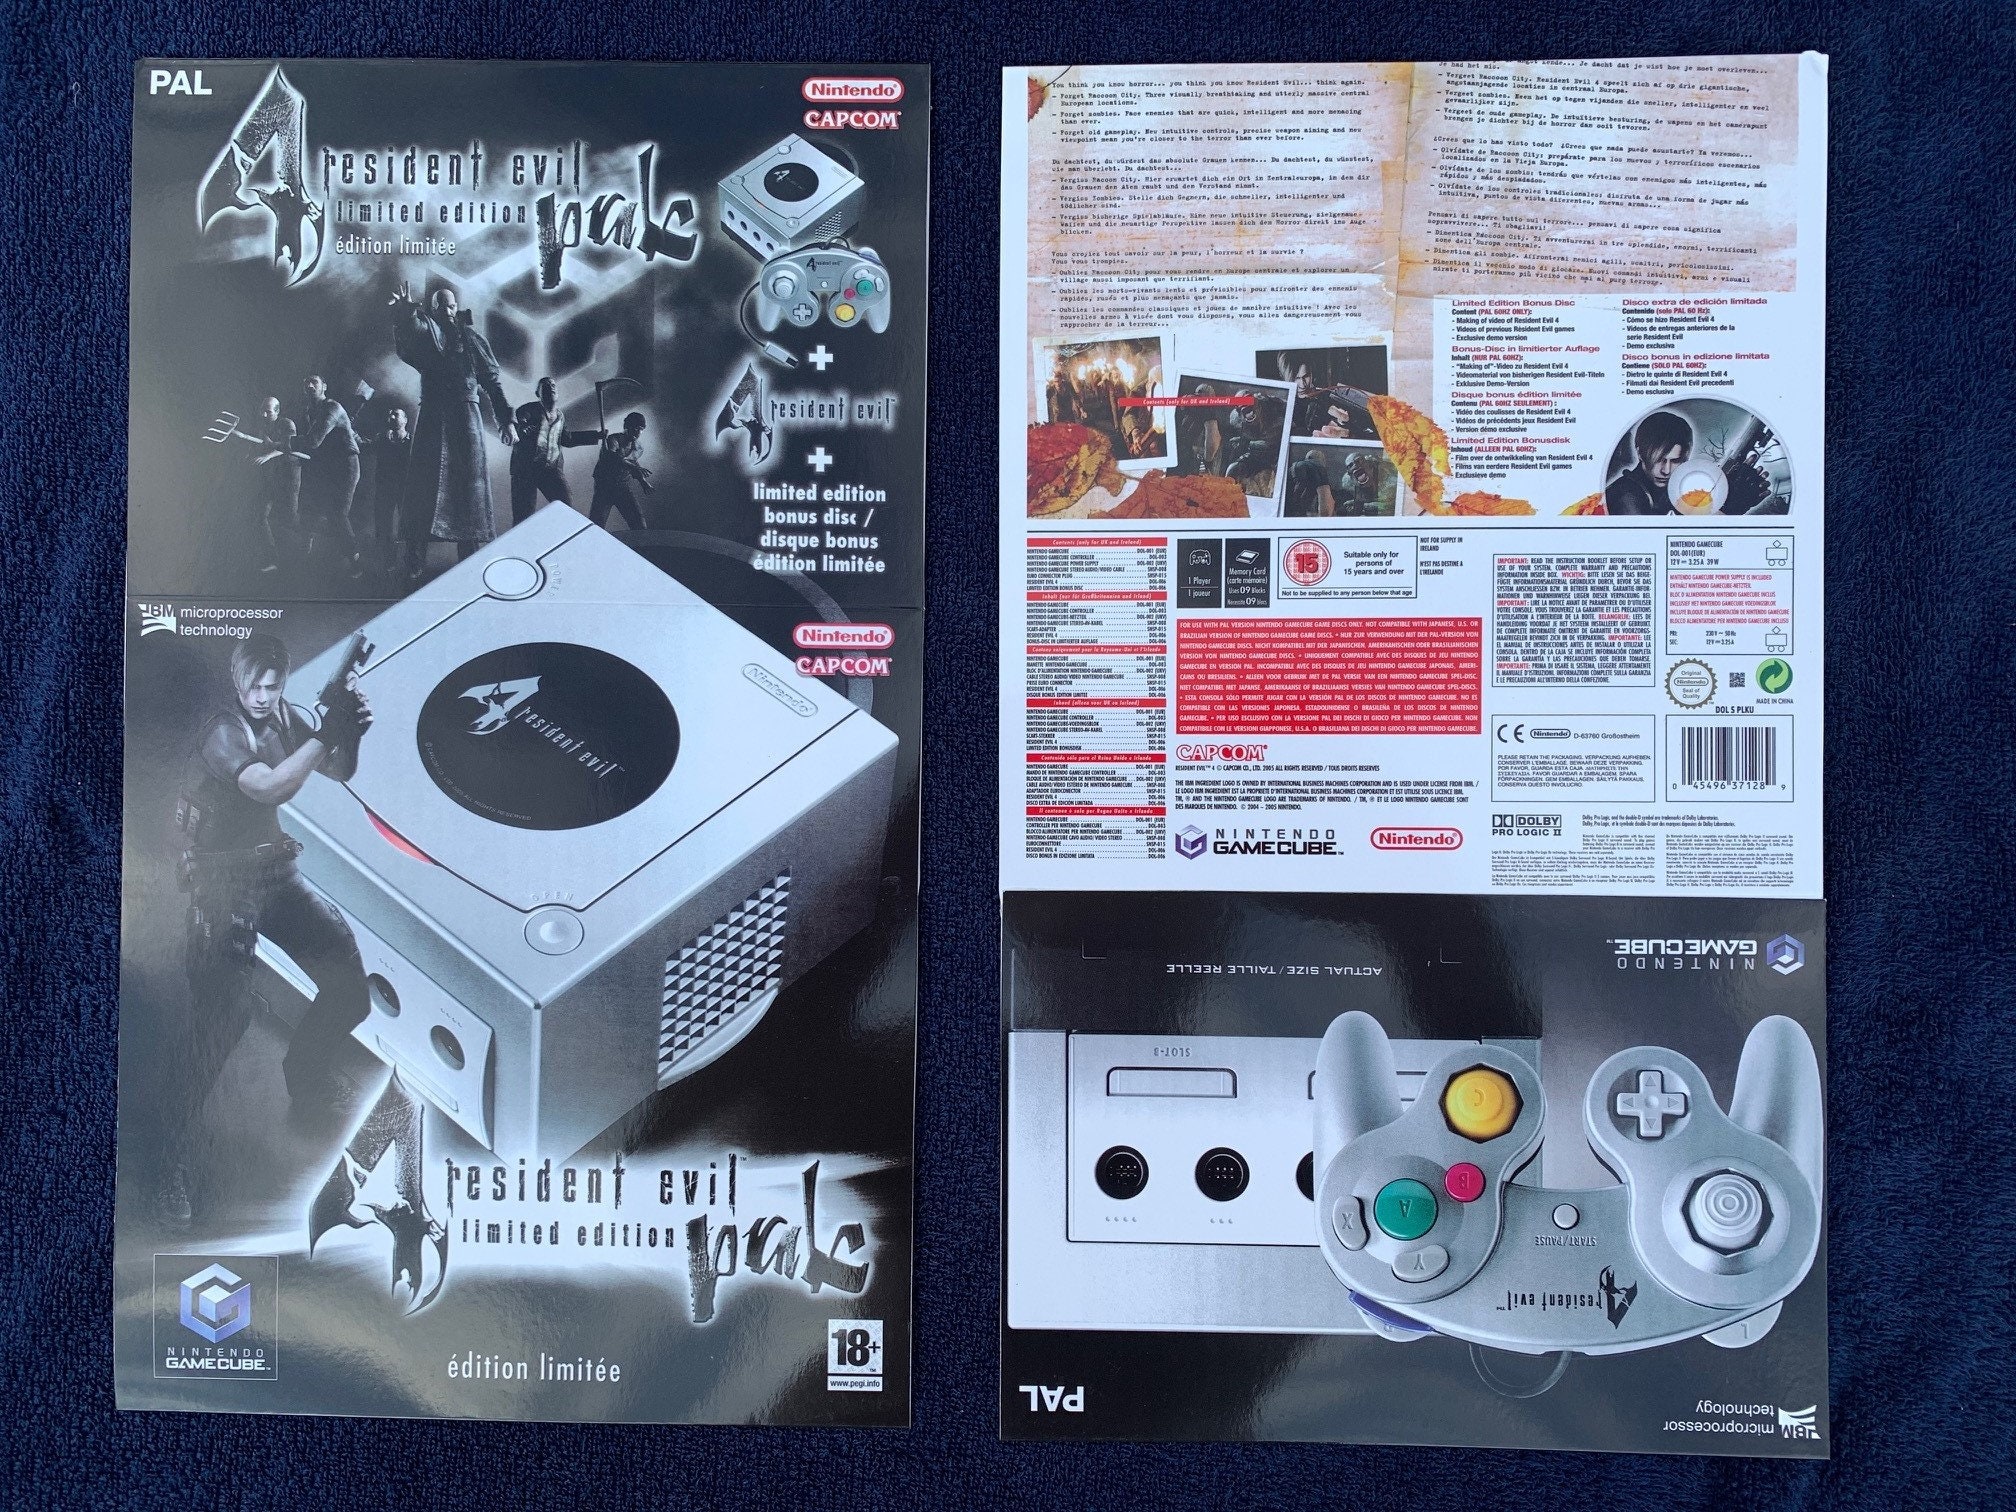 Resident Evil Code: Veronica Xs Nintendo GameCube Game For Sale